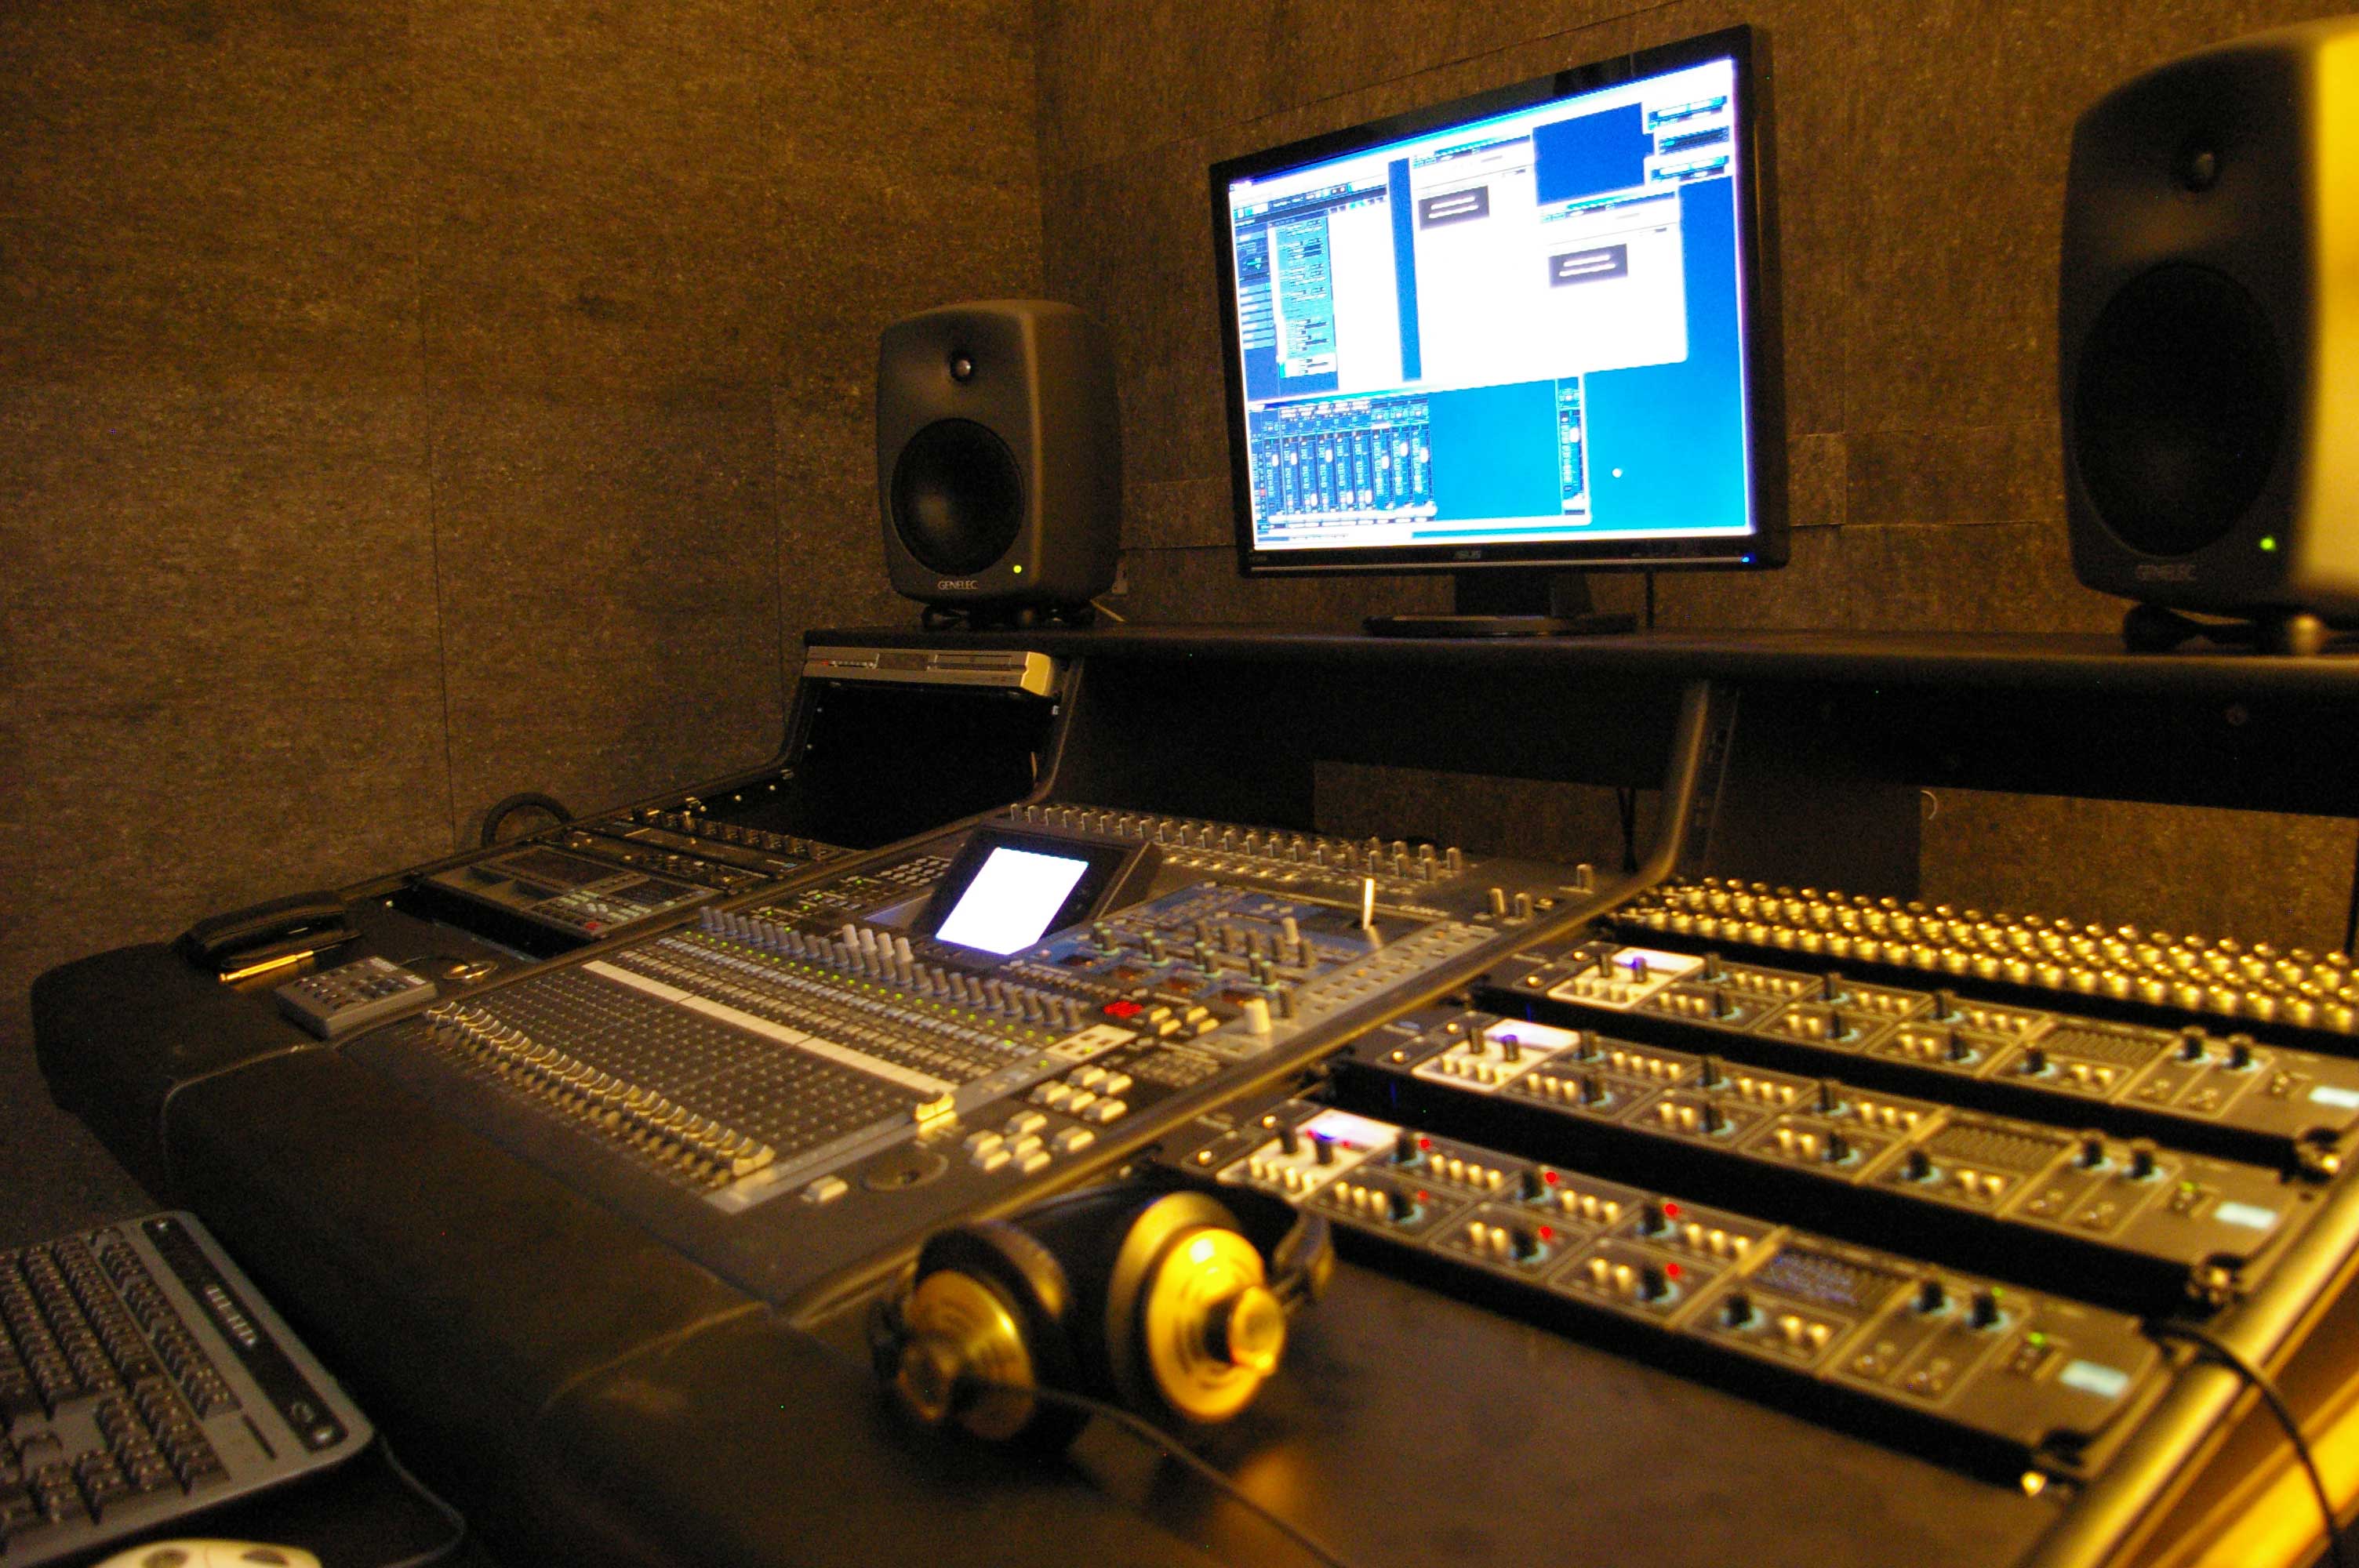 Control room of the StudioLab